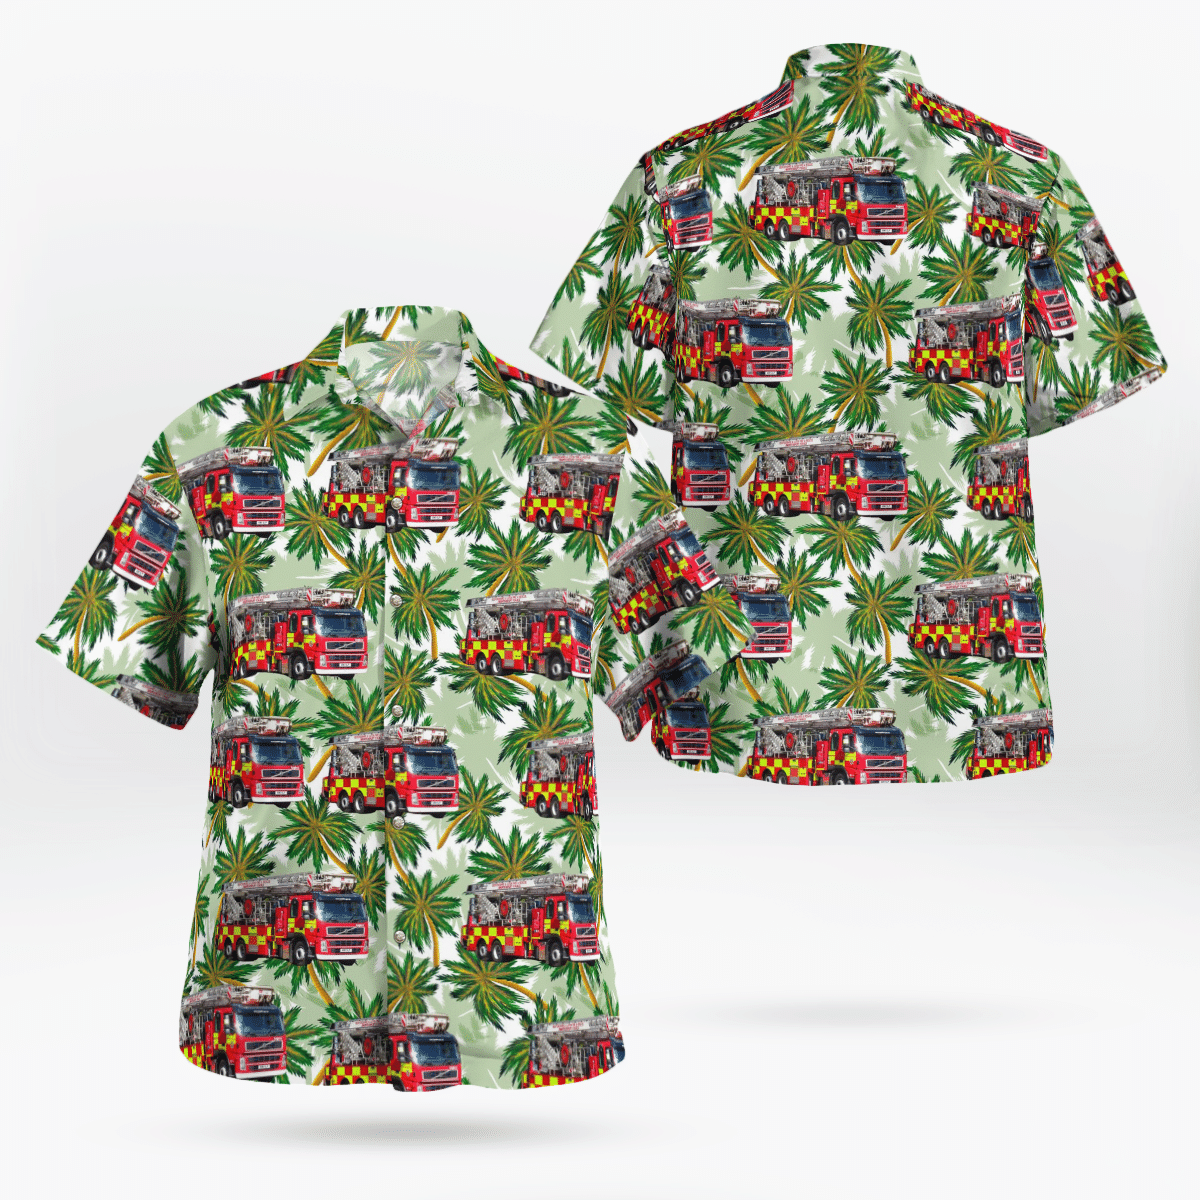 If you are in need of a new summertime look, pick up this Hawaiian shirt 280